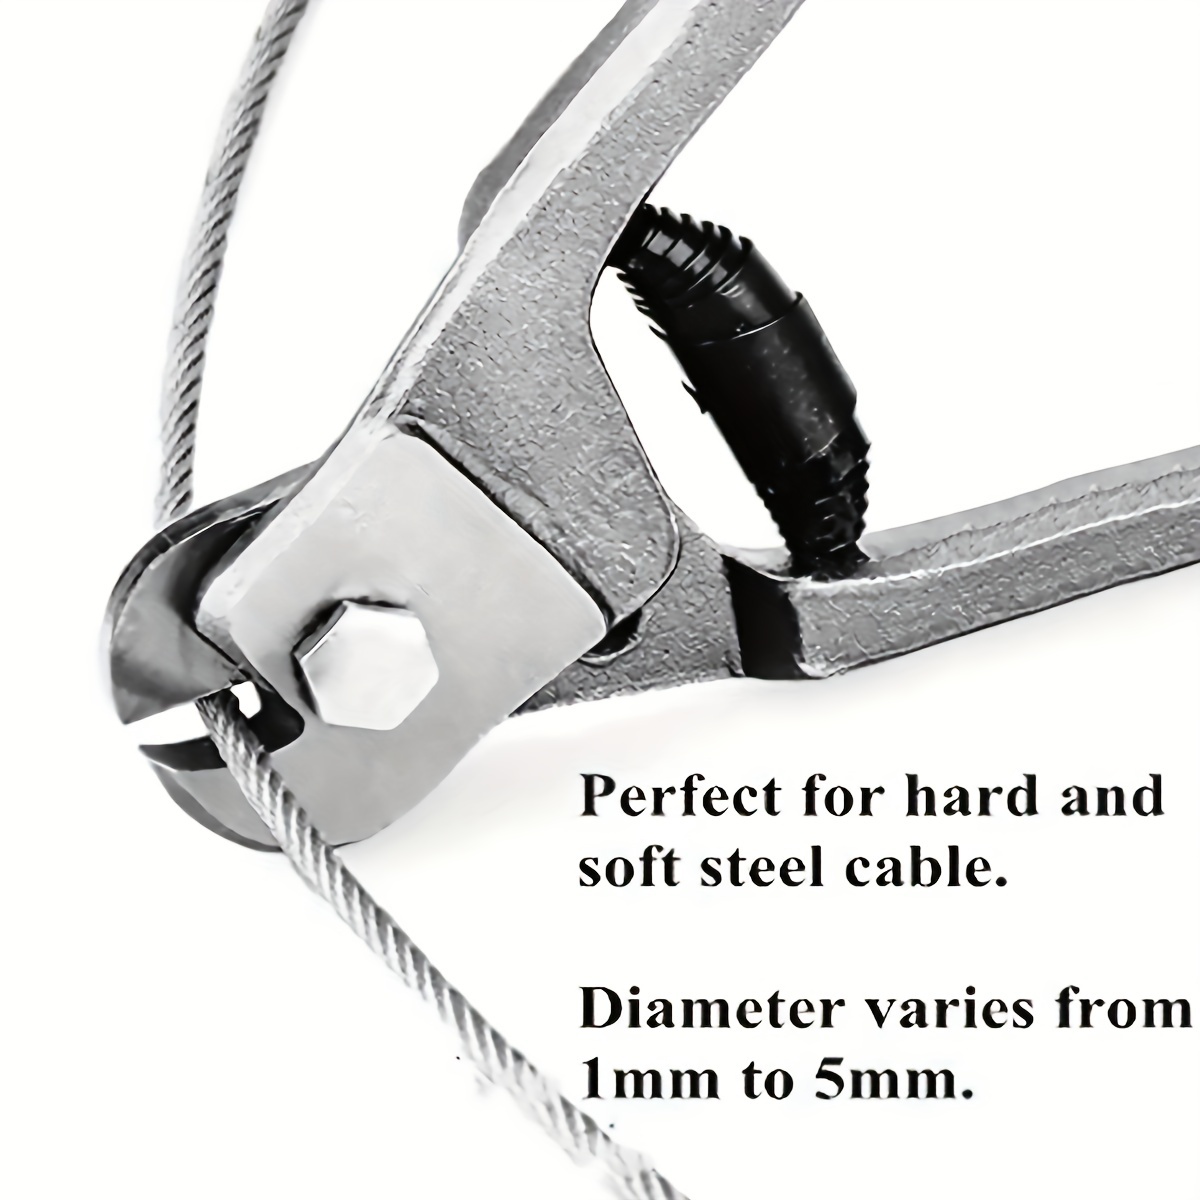 QLOUNI Stainless Steel Cable Cutter Wire Rope Aircraft Cable Cutter Bicycle  Cable and Housing Cutter Cuts Up to 5/32 Steel